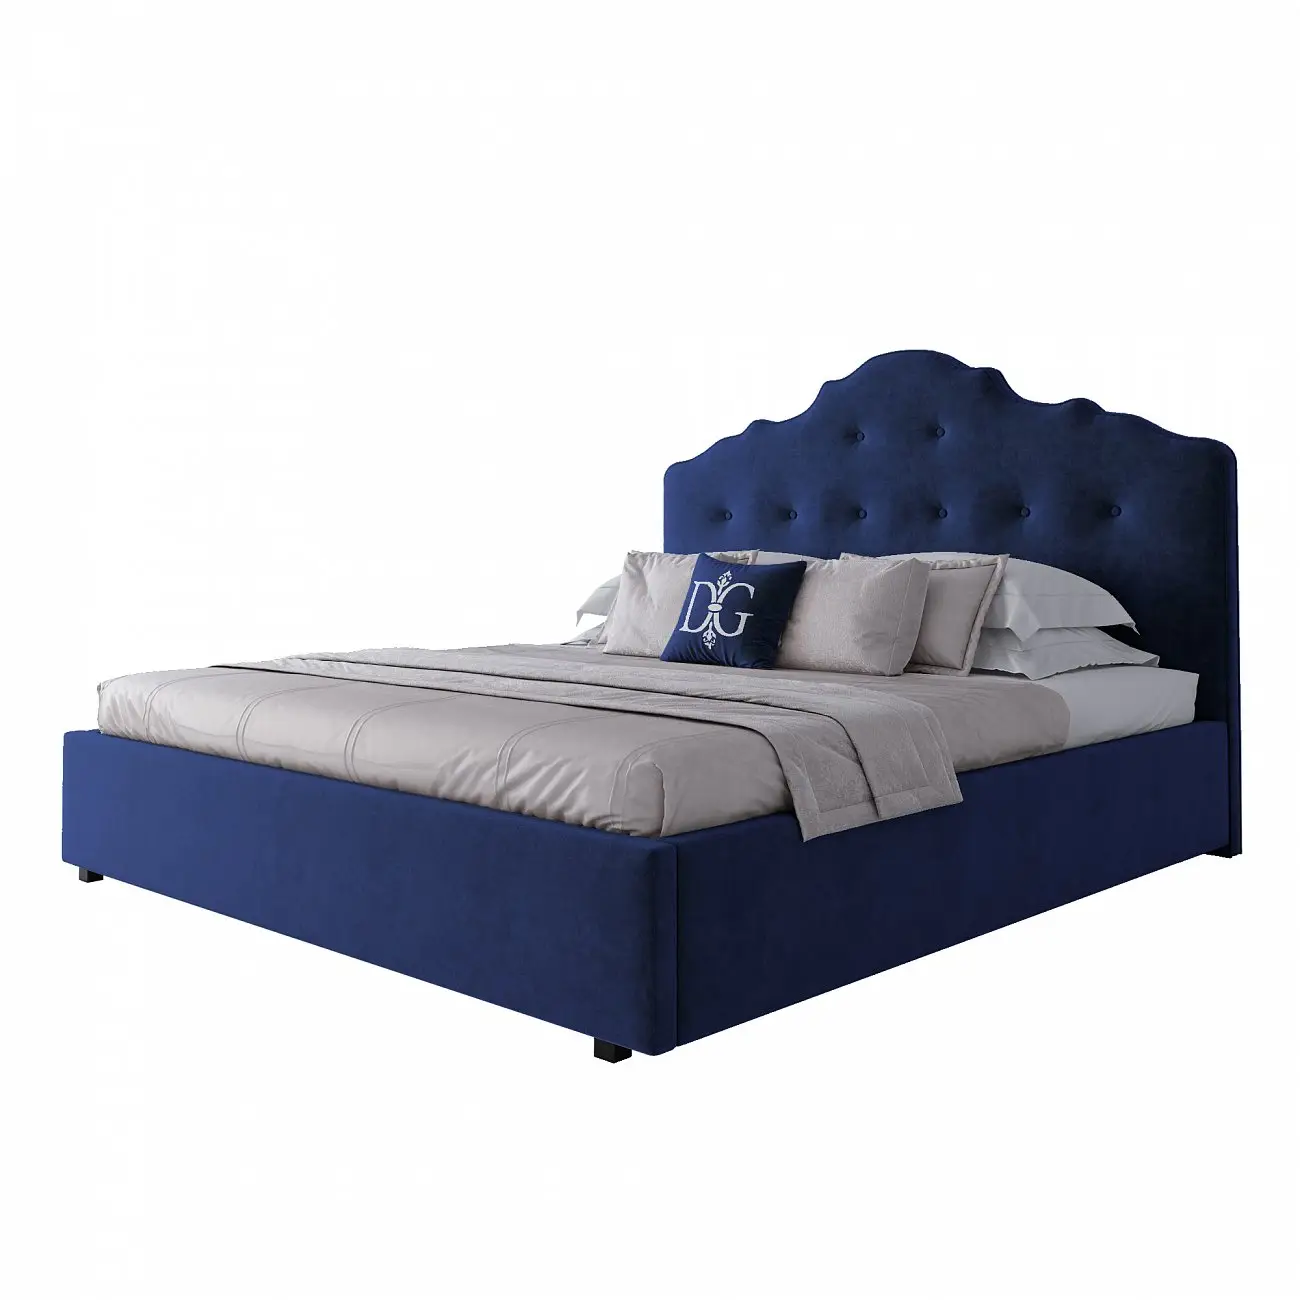 Double bed 180x200 blue Palace